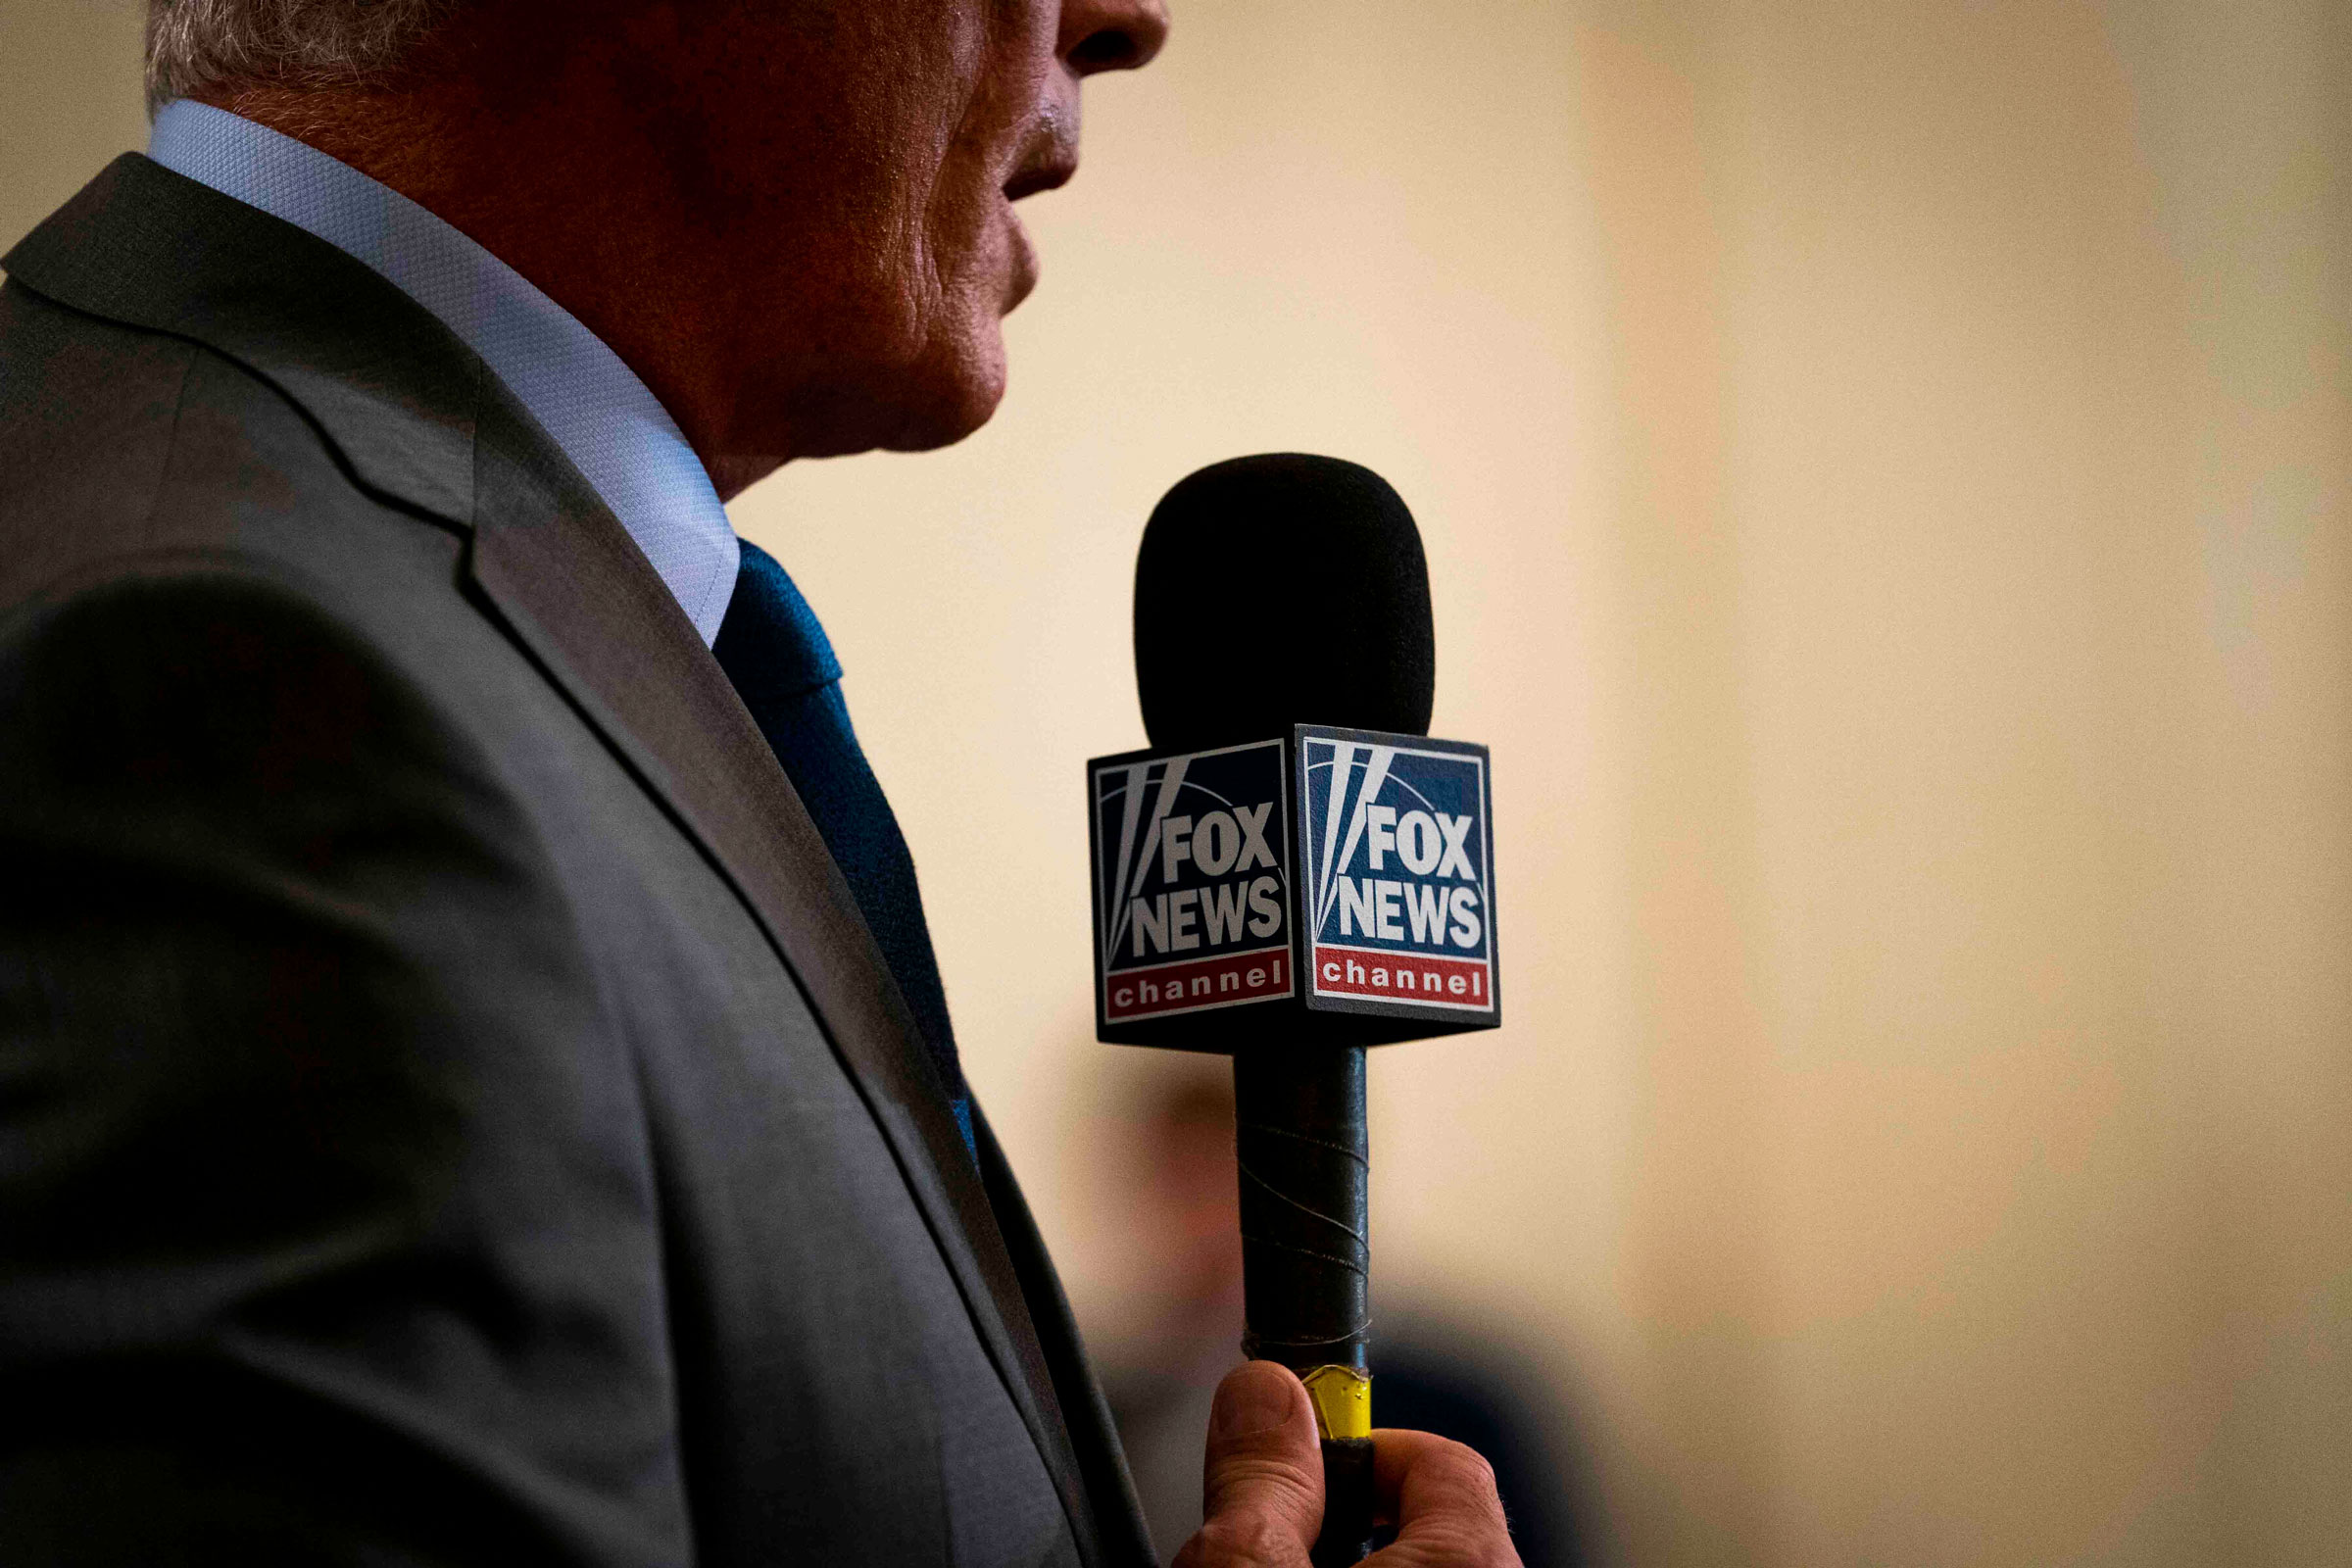 A Fox News reporter during coverage of a news conference at the White House in Washington, D.C, on Oct. 2, 2019. (Doug Mills—The New York Times/Redux)